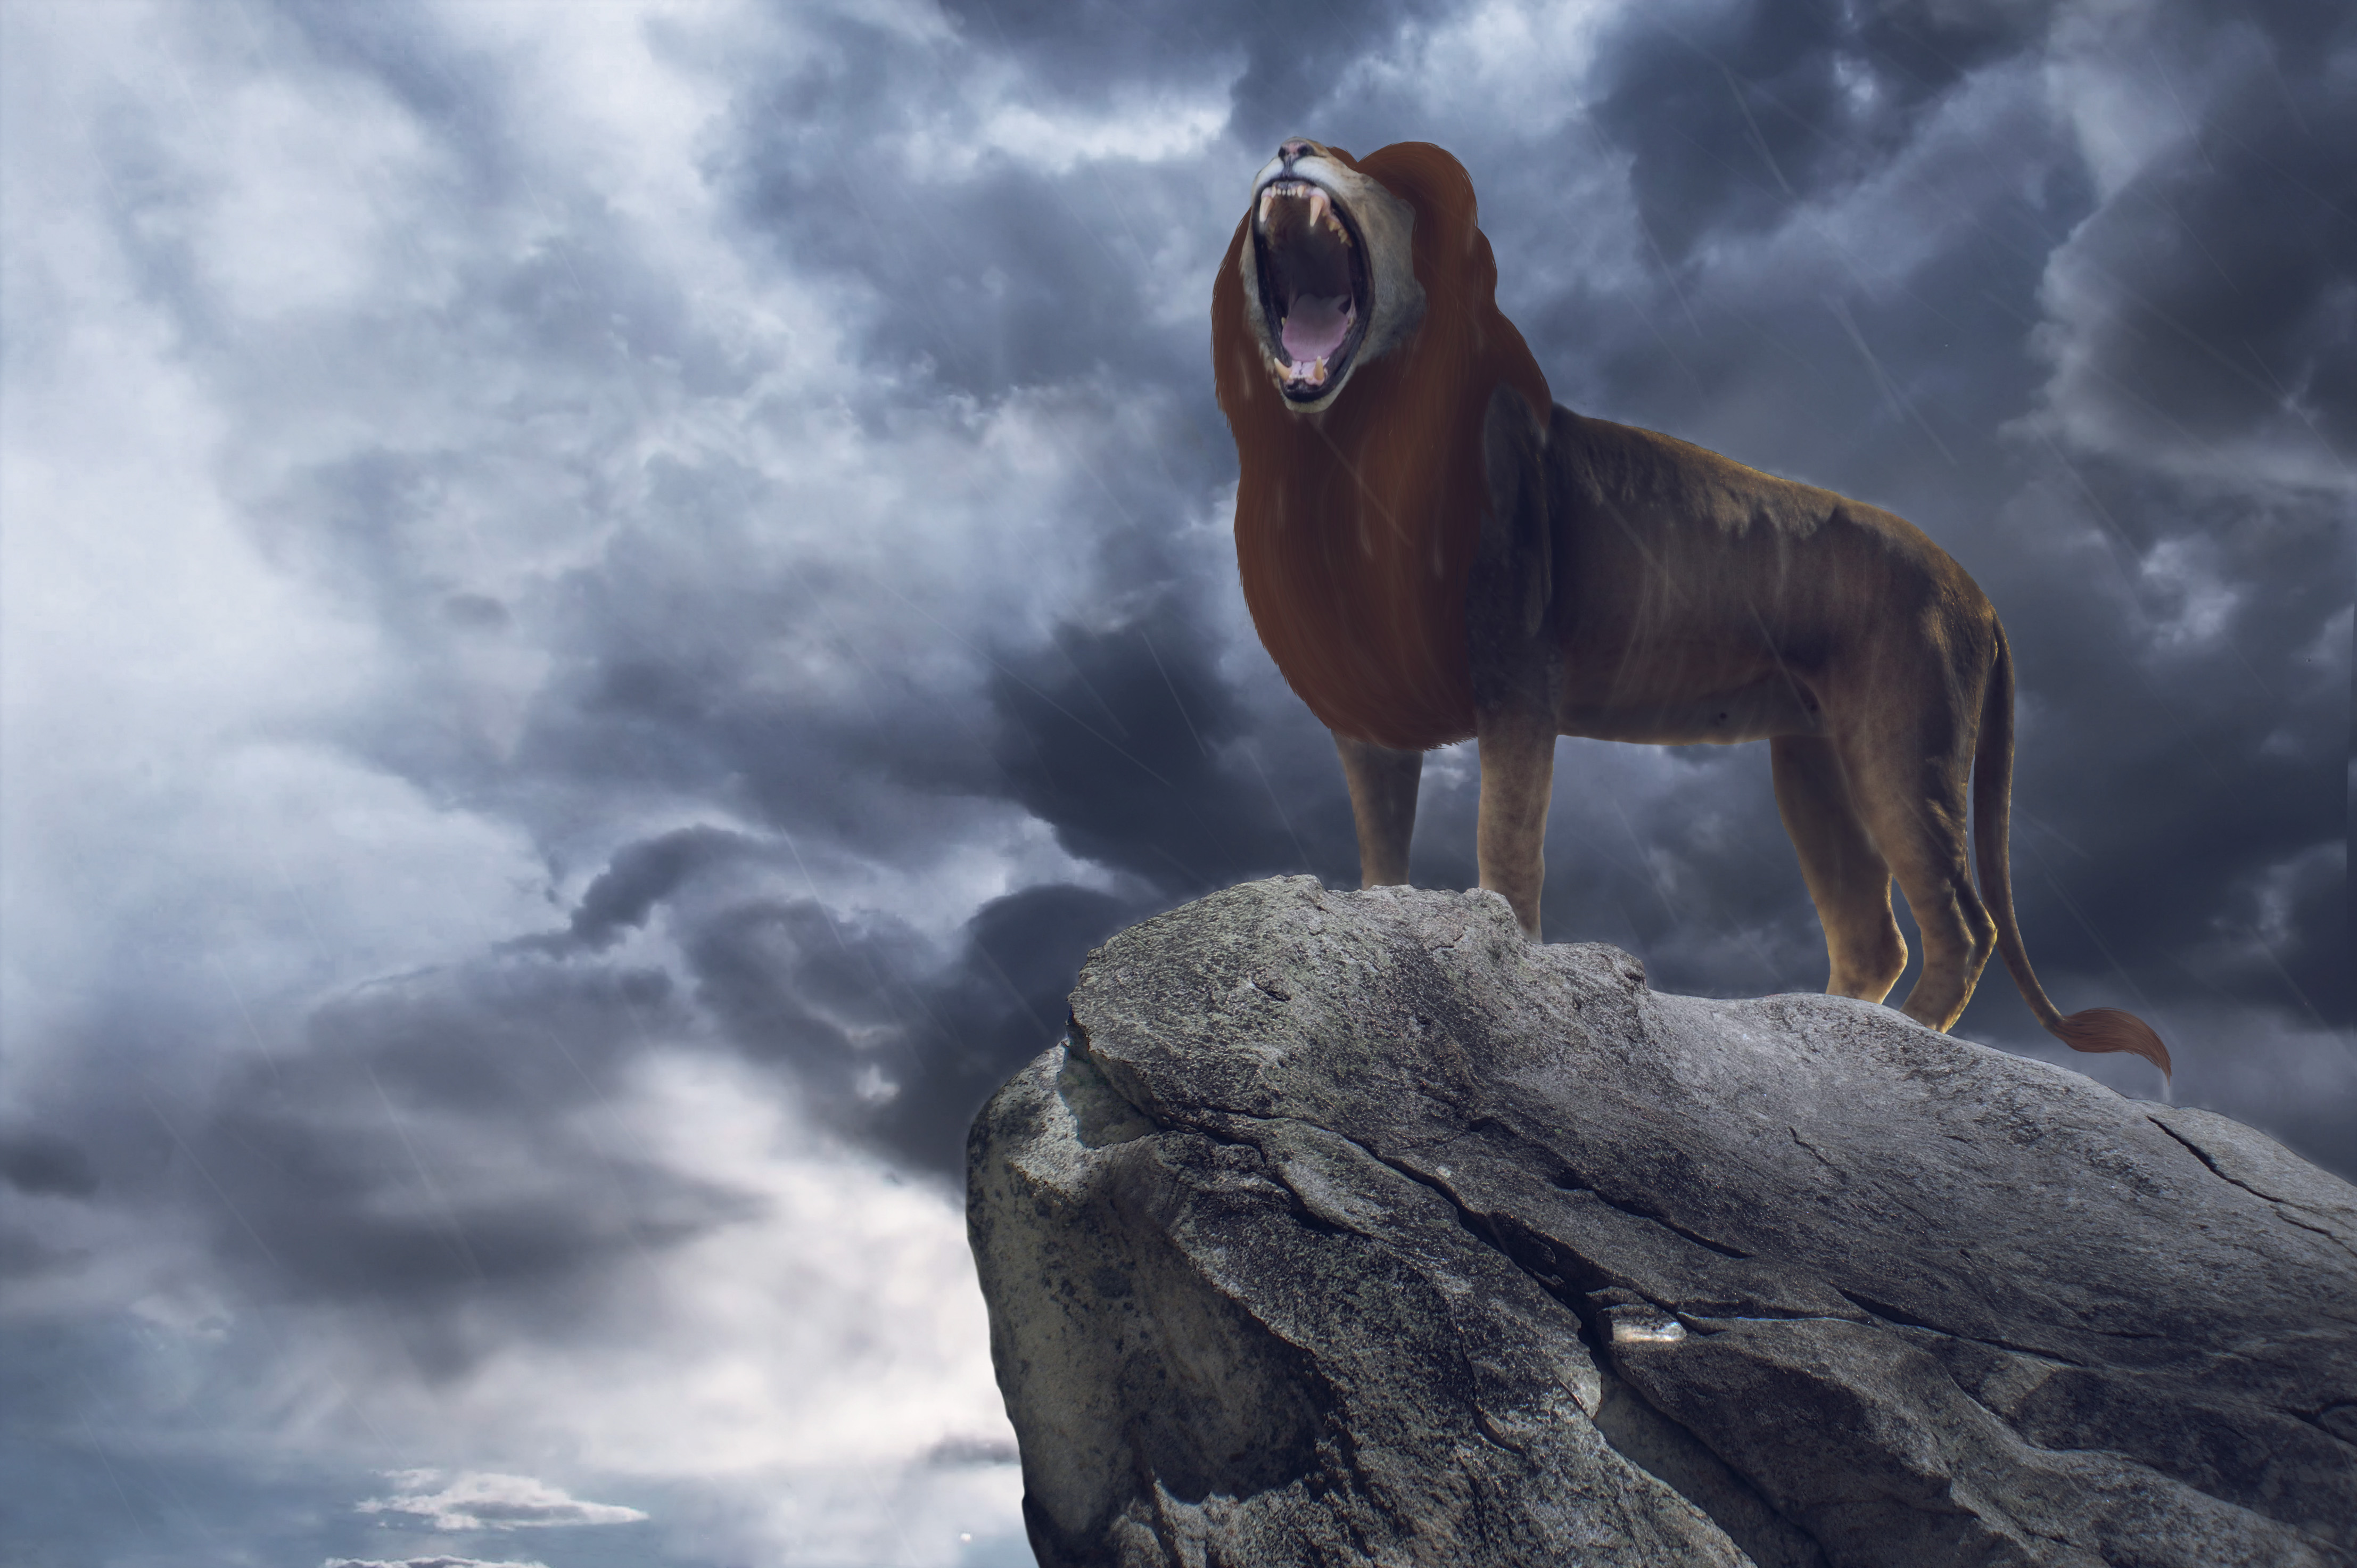 Movie The Lion King (2019) HD Wallpaper | Background Image